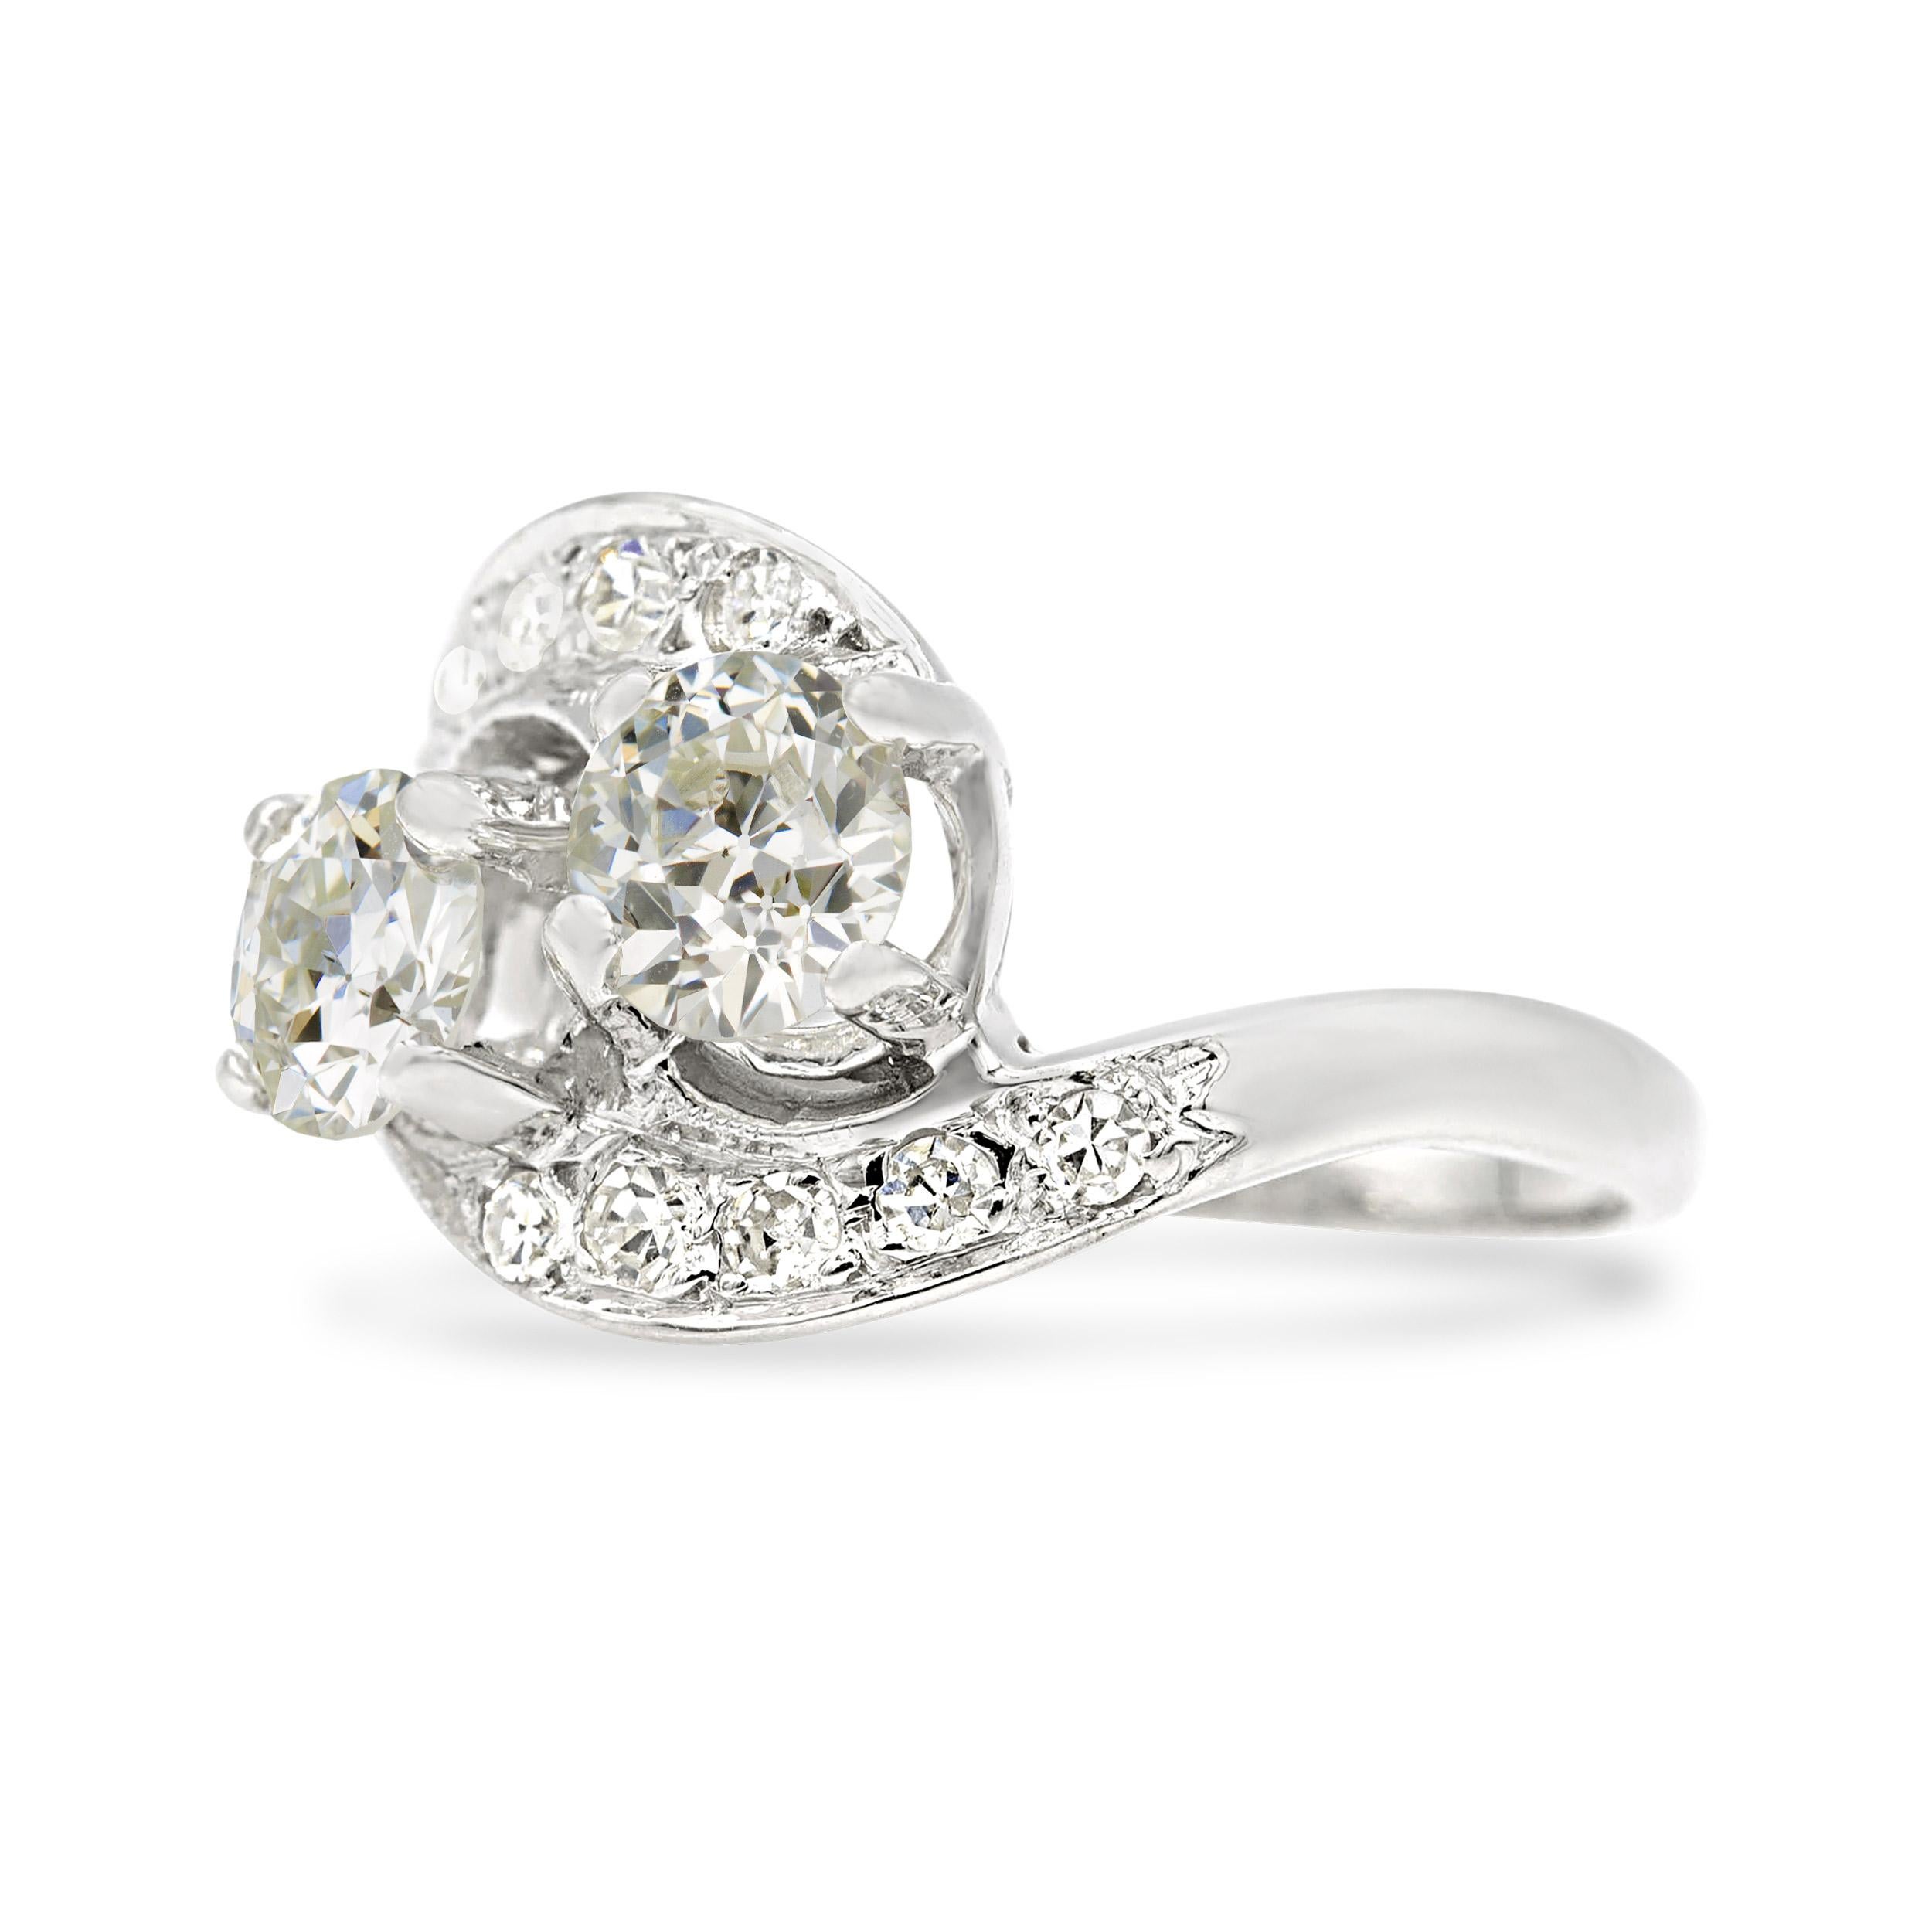 Two sparkling old European diamonds are the stars of this romantic deco ring. Graded K and J color by GIA, these charming Euro’s face much whiter, and absolutely sparkle with brilliance. The toi et moi setting is perfectly suited for this matching